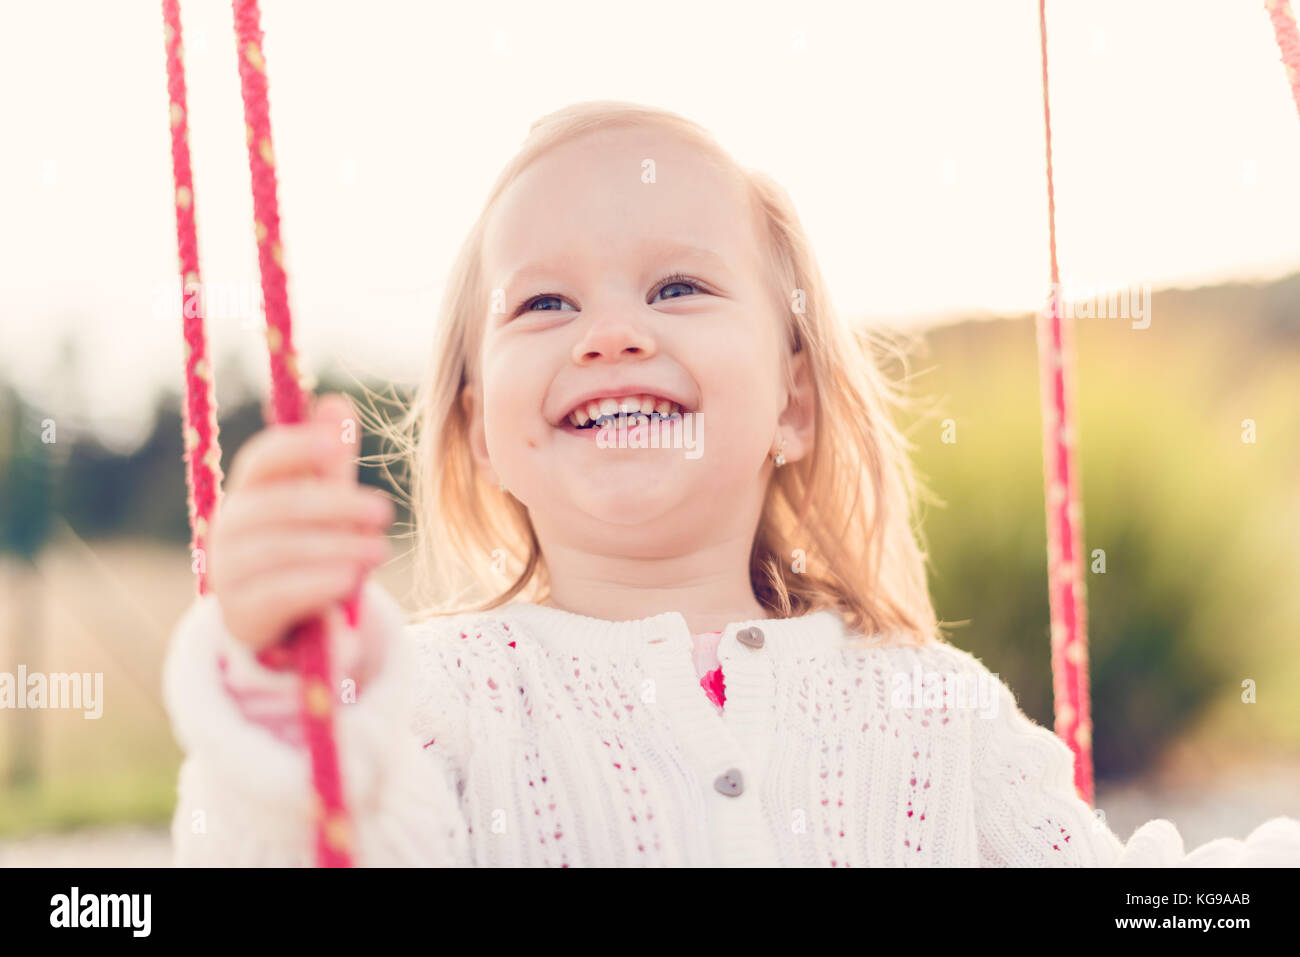 Little girl swinging on a playground. Childhood, Freedom, Happy, Summer Outdoor Concept Stock Photo